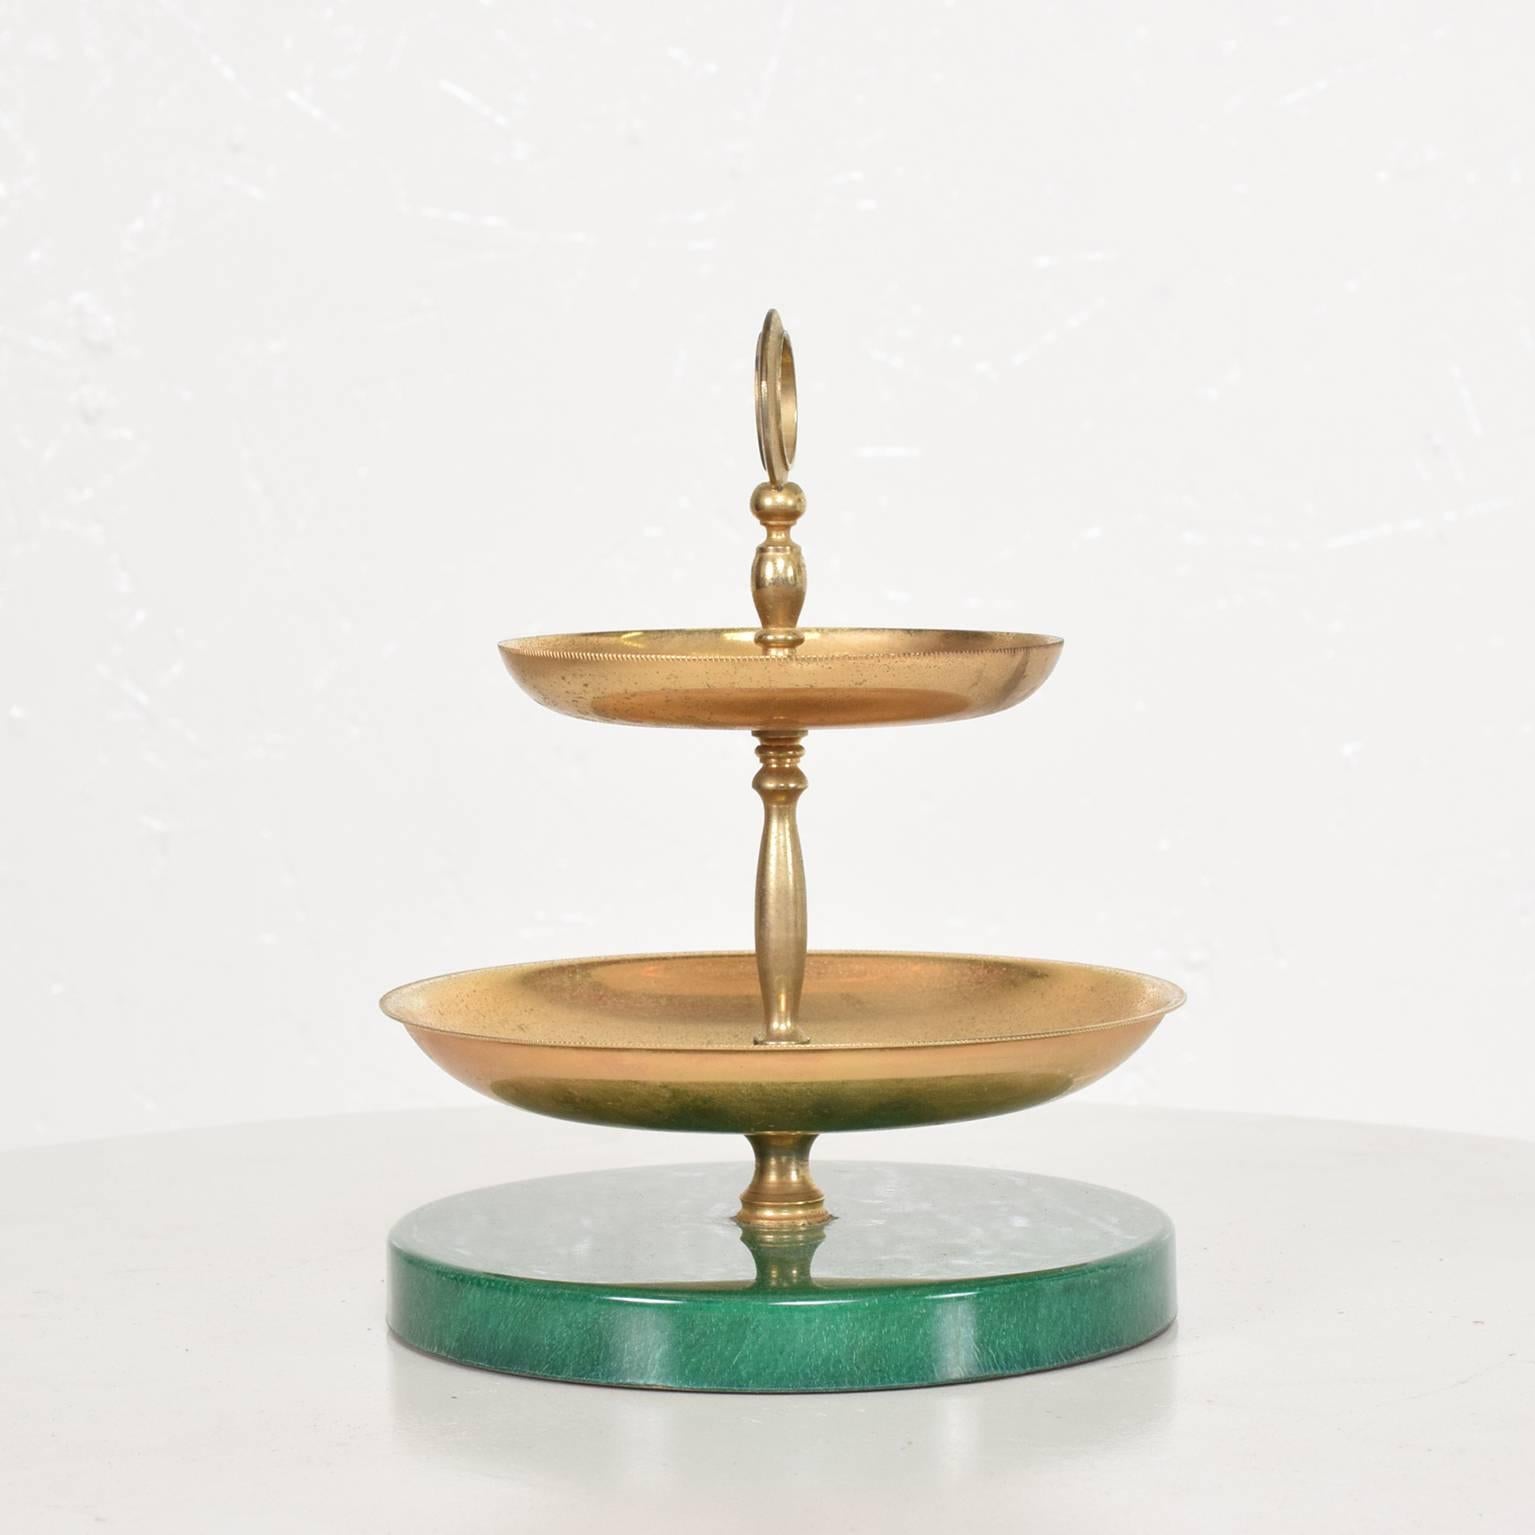 For your consideration a beautiful Aldo Tura two-tier candy dish in elegant emerald green goatskin and brass,
Italy, 1960s.
Measure: 9 1/2